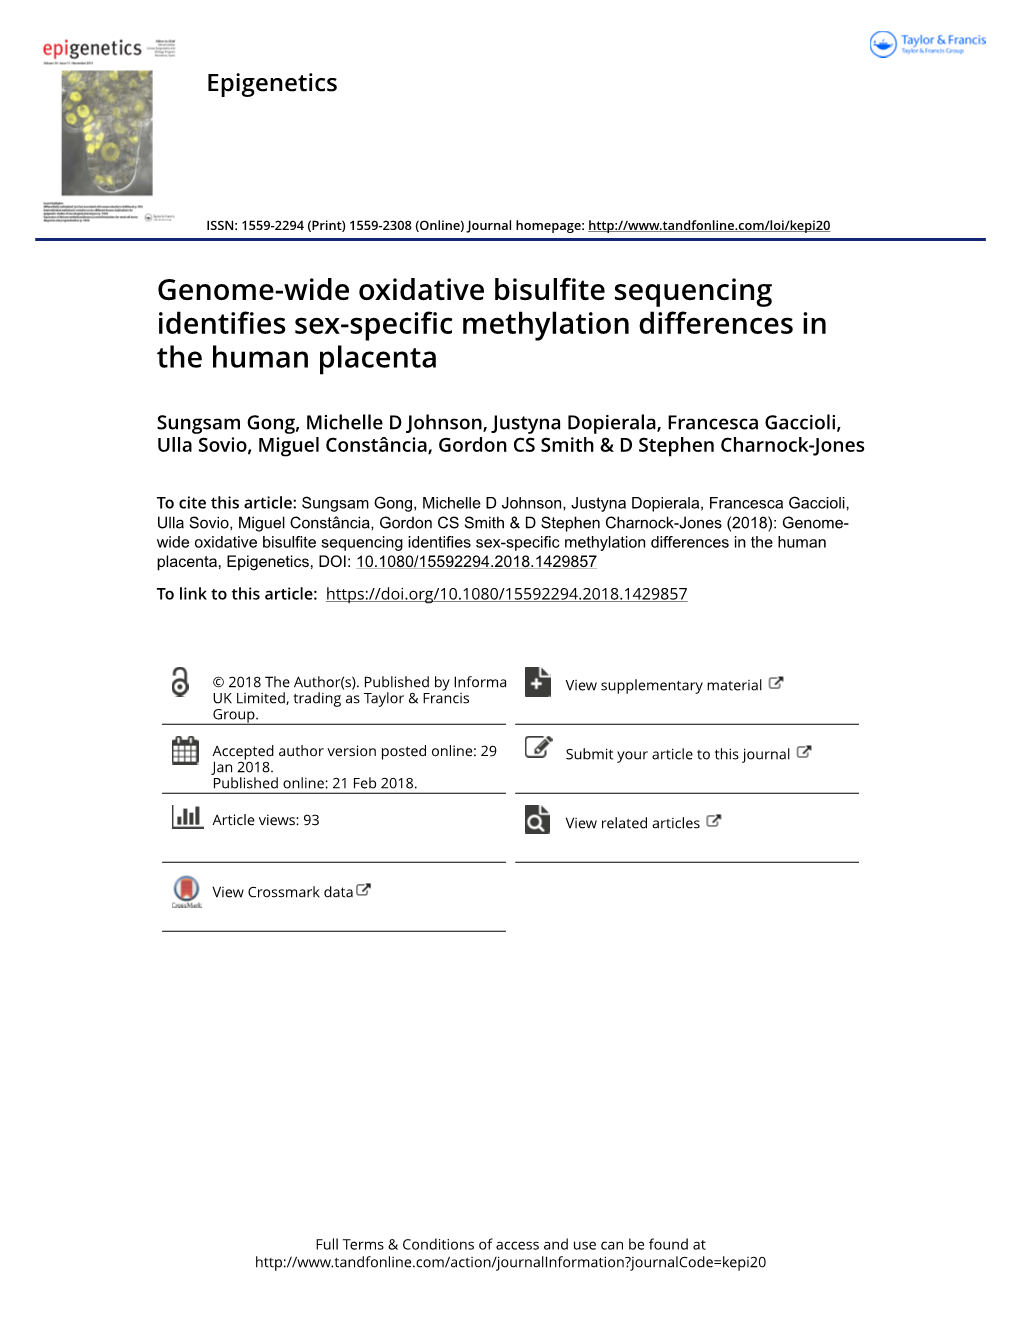 Genome-Wide Oxidative Bisulfite Sequencing Identifies Sex-Specific Methylation Differences in the Human Placenta